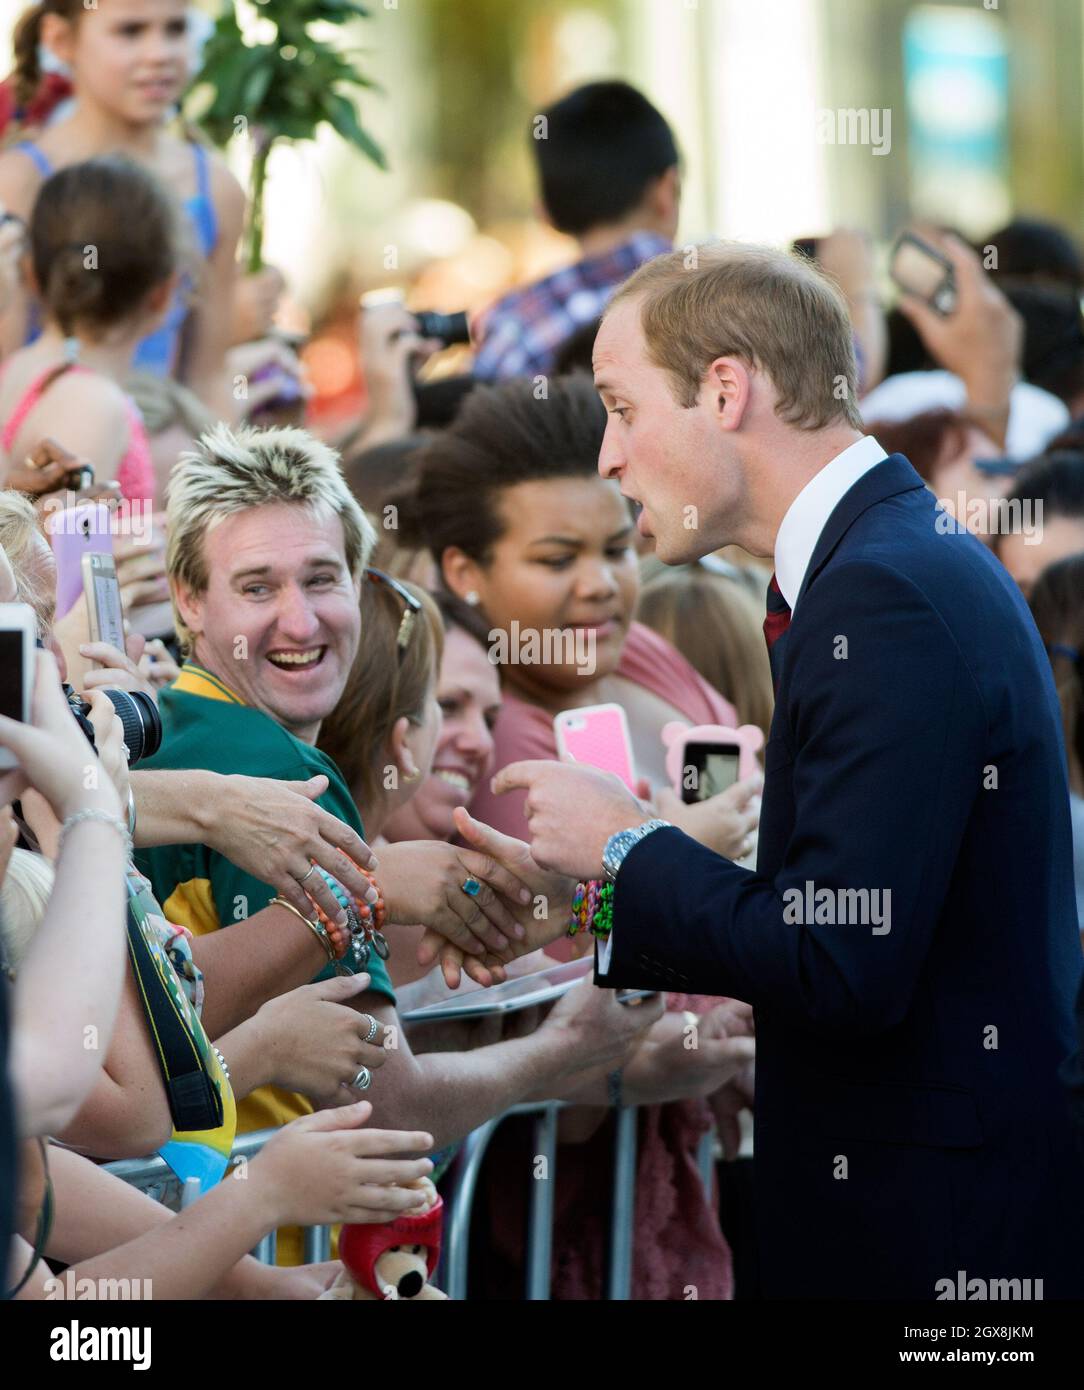 Prince William, Duke of Cambridge greets well wishers during a walkabout in Brisbane, Australia on April 19, 2014. The Duchess is wearing a blue and white LK Bennett dress    Stock Photo